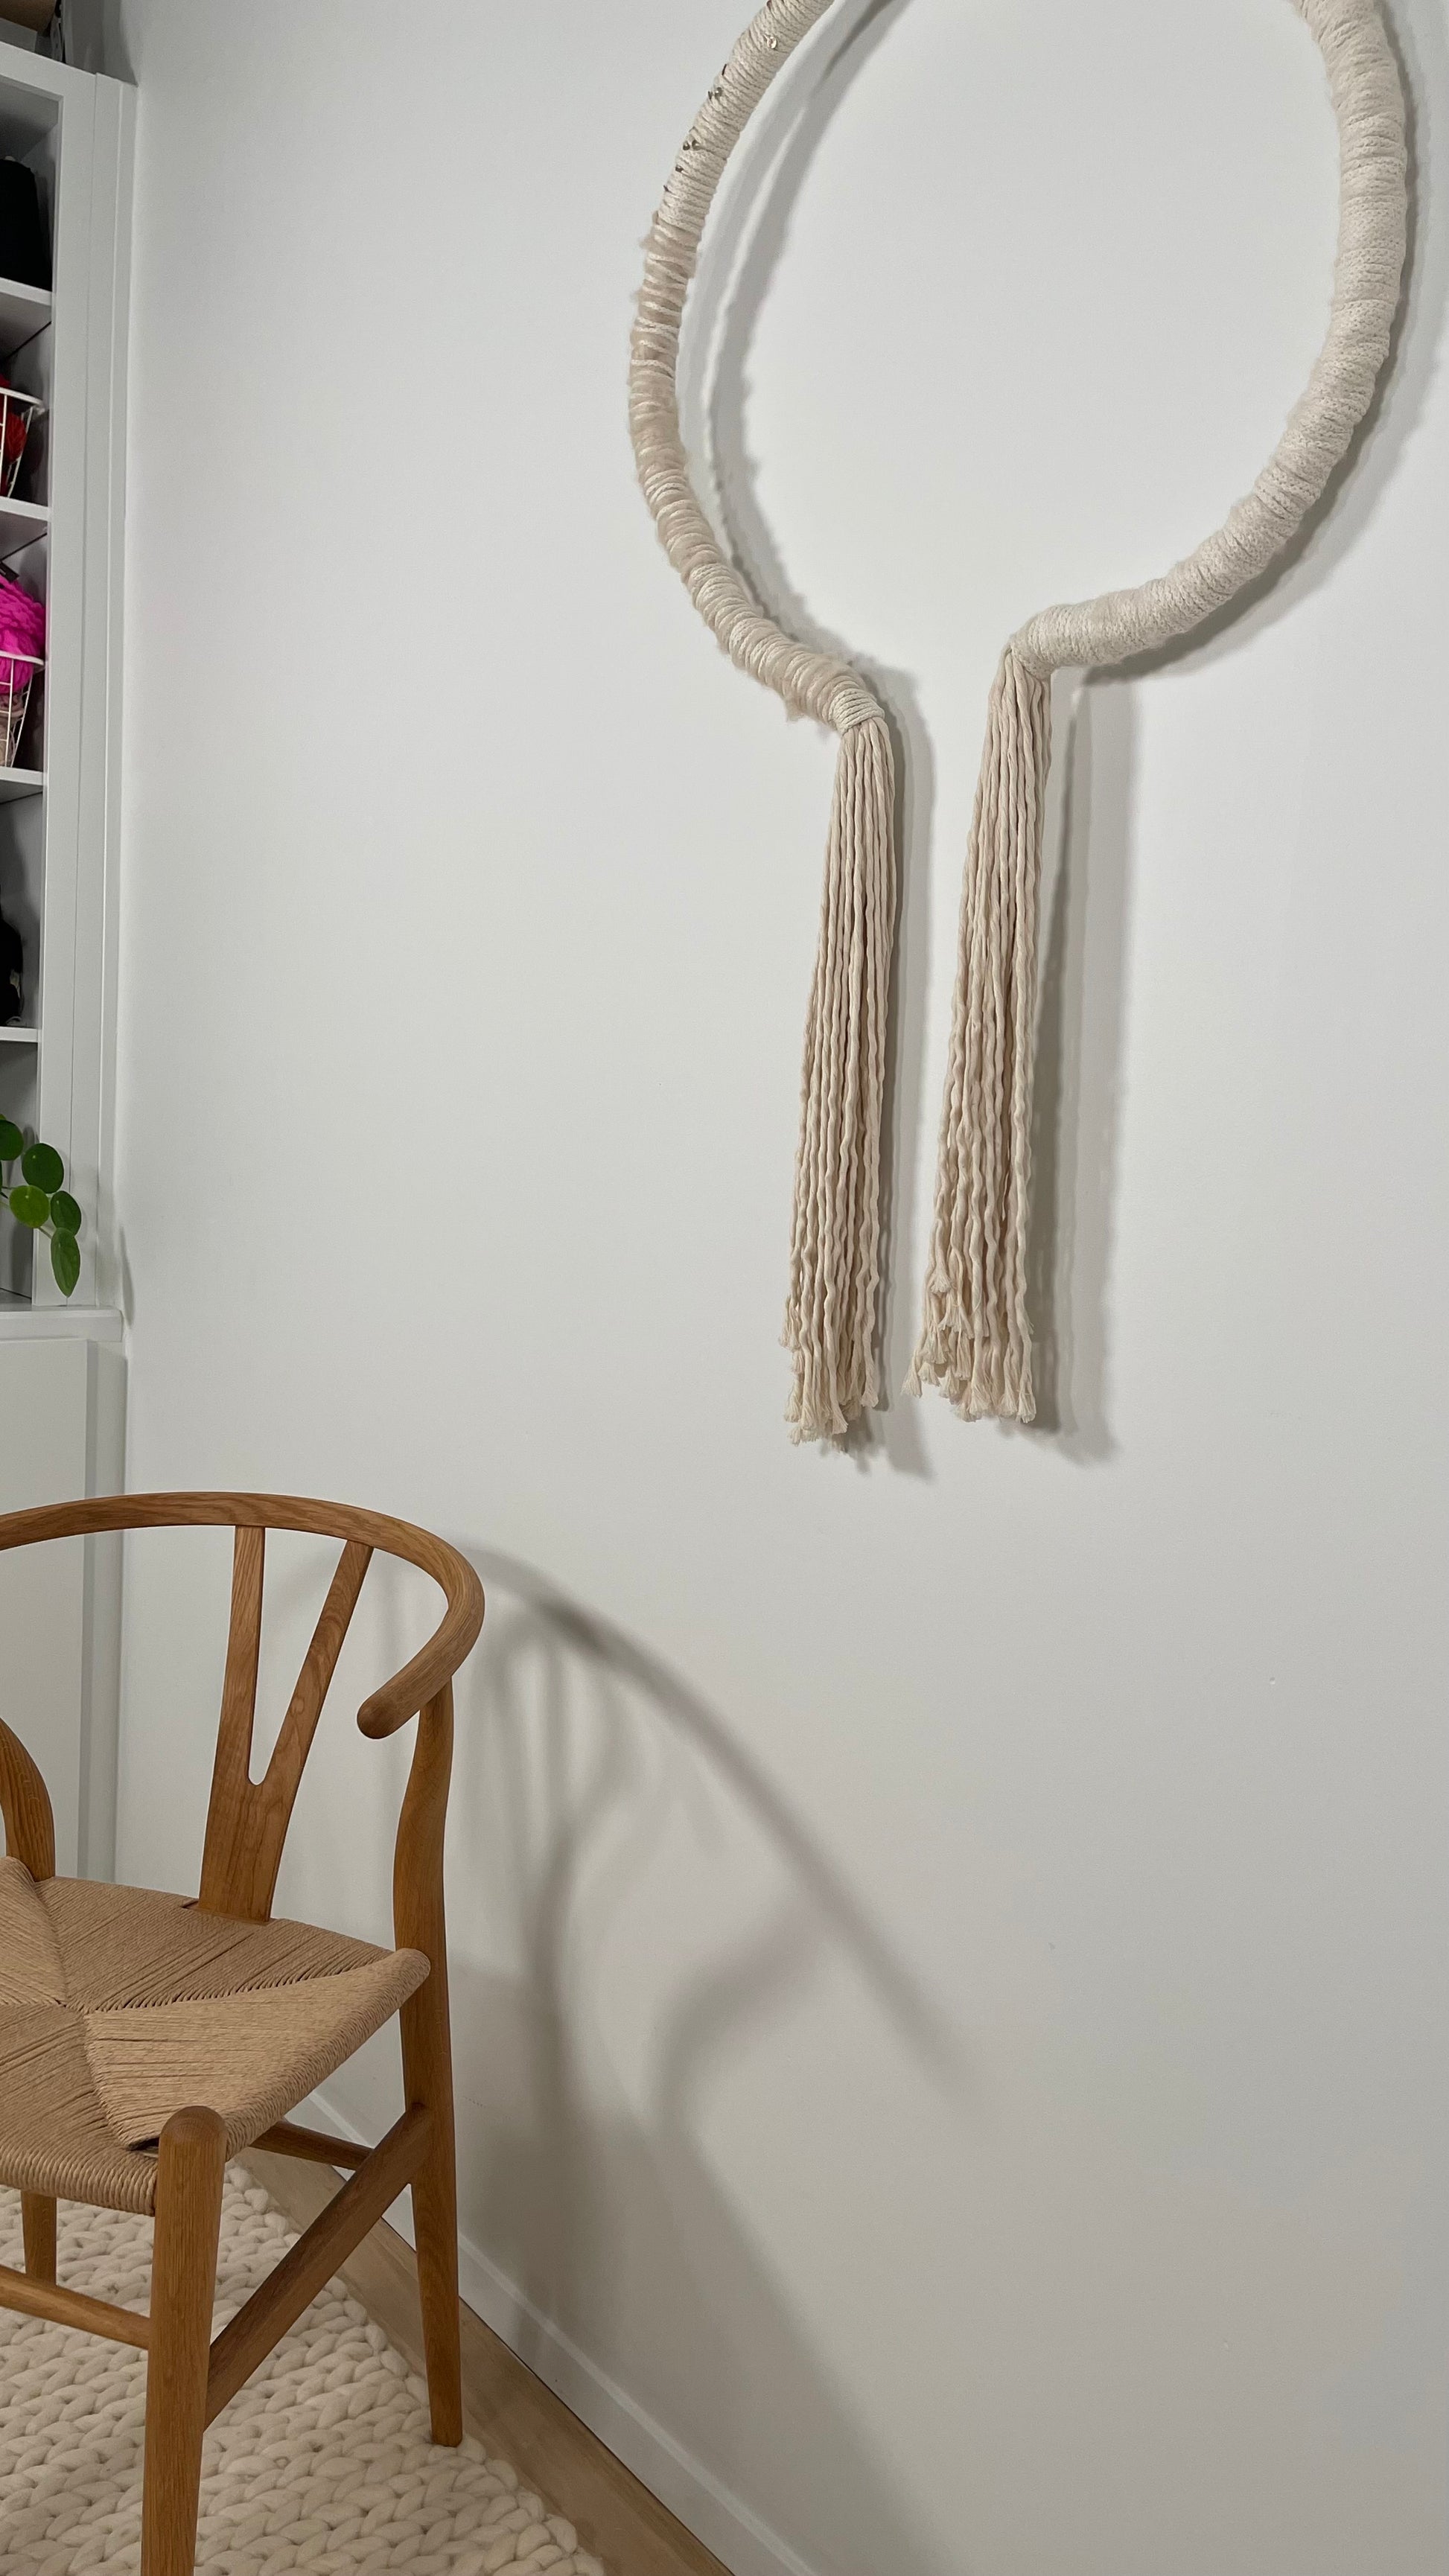 wrapped wall hanging in natural color cotton and yarns